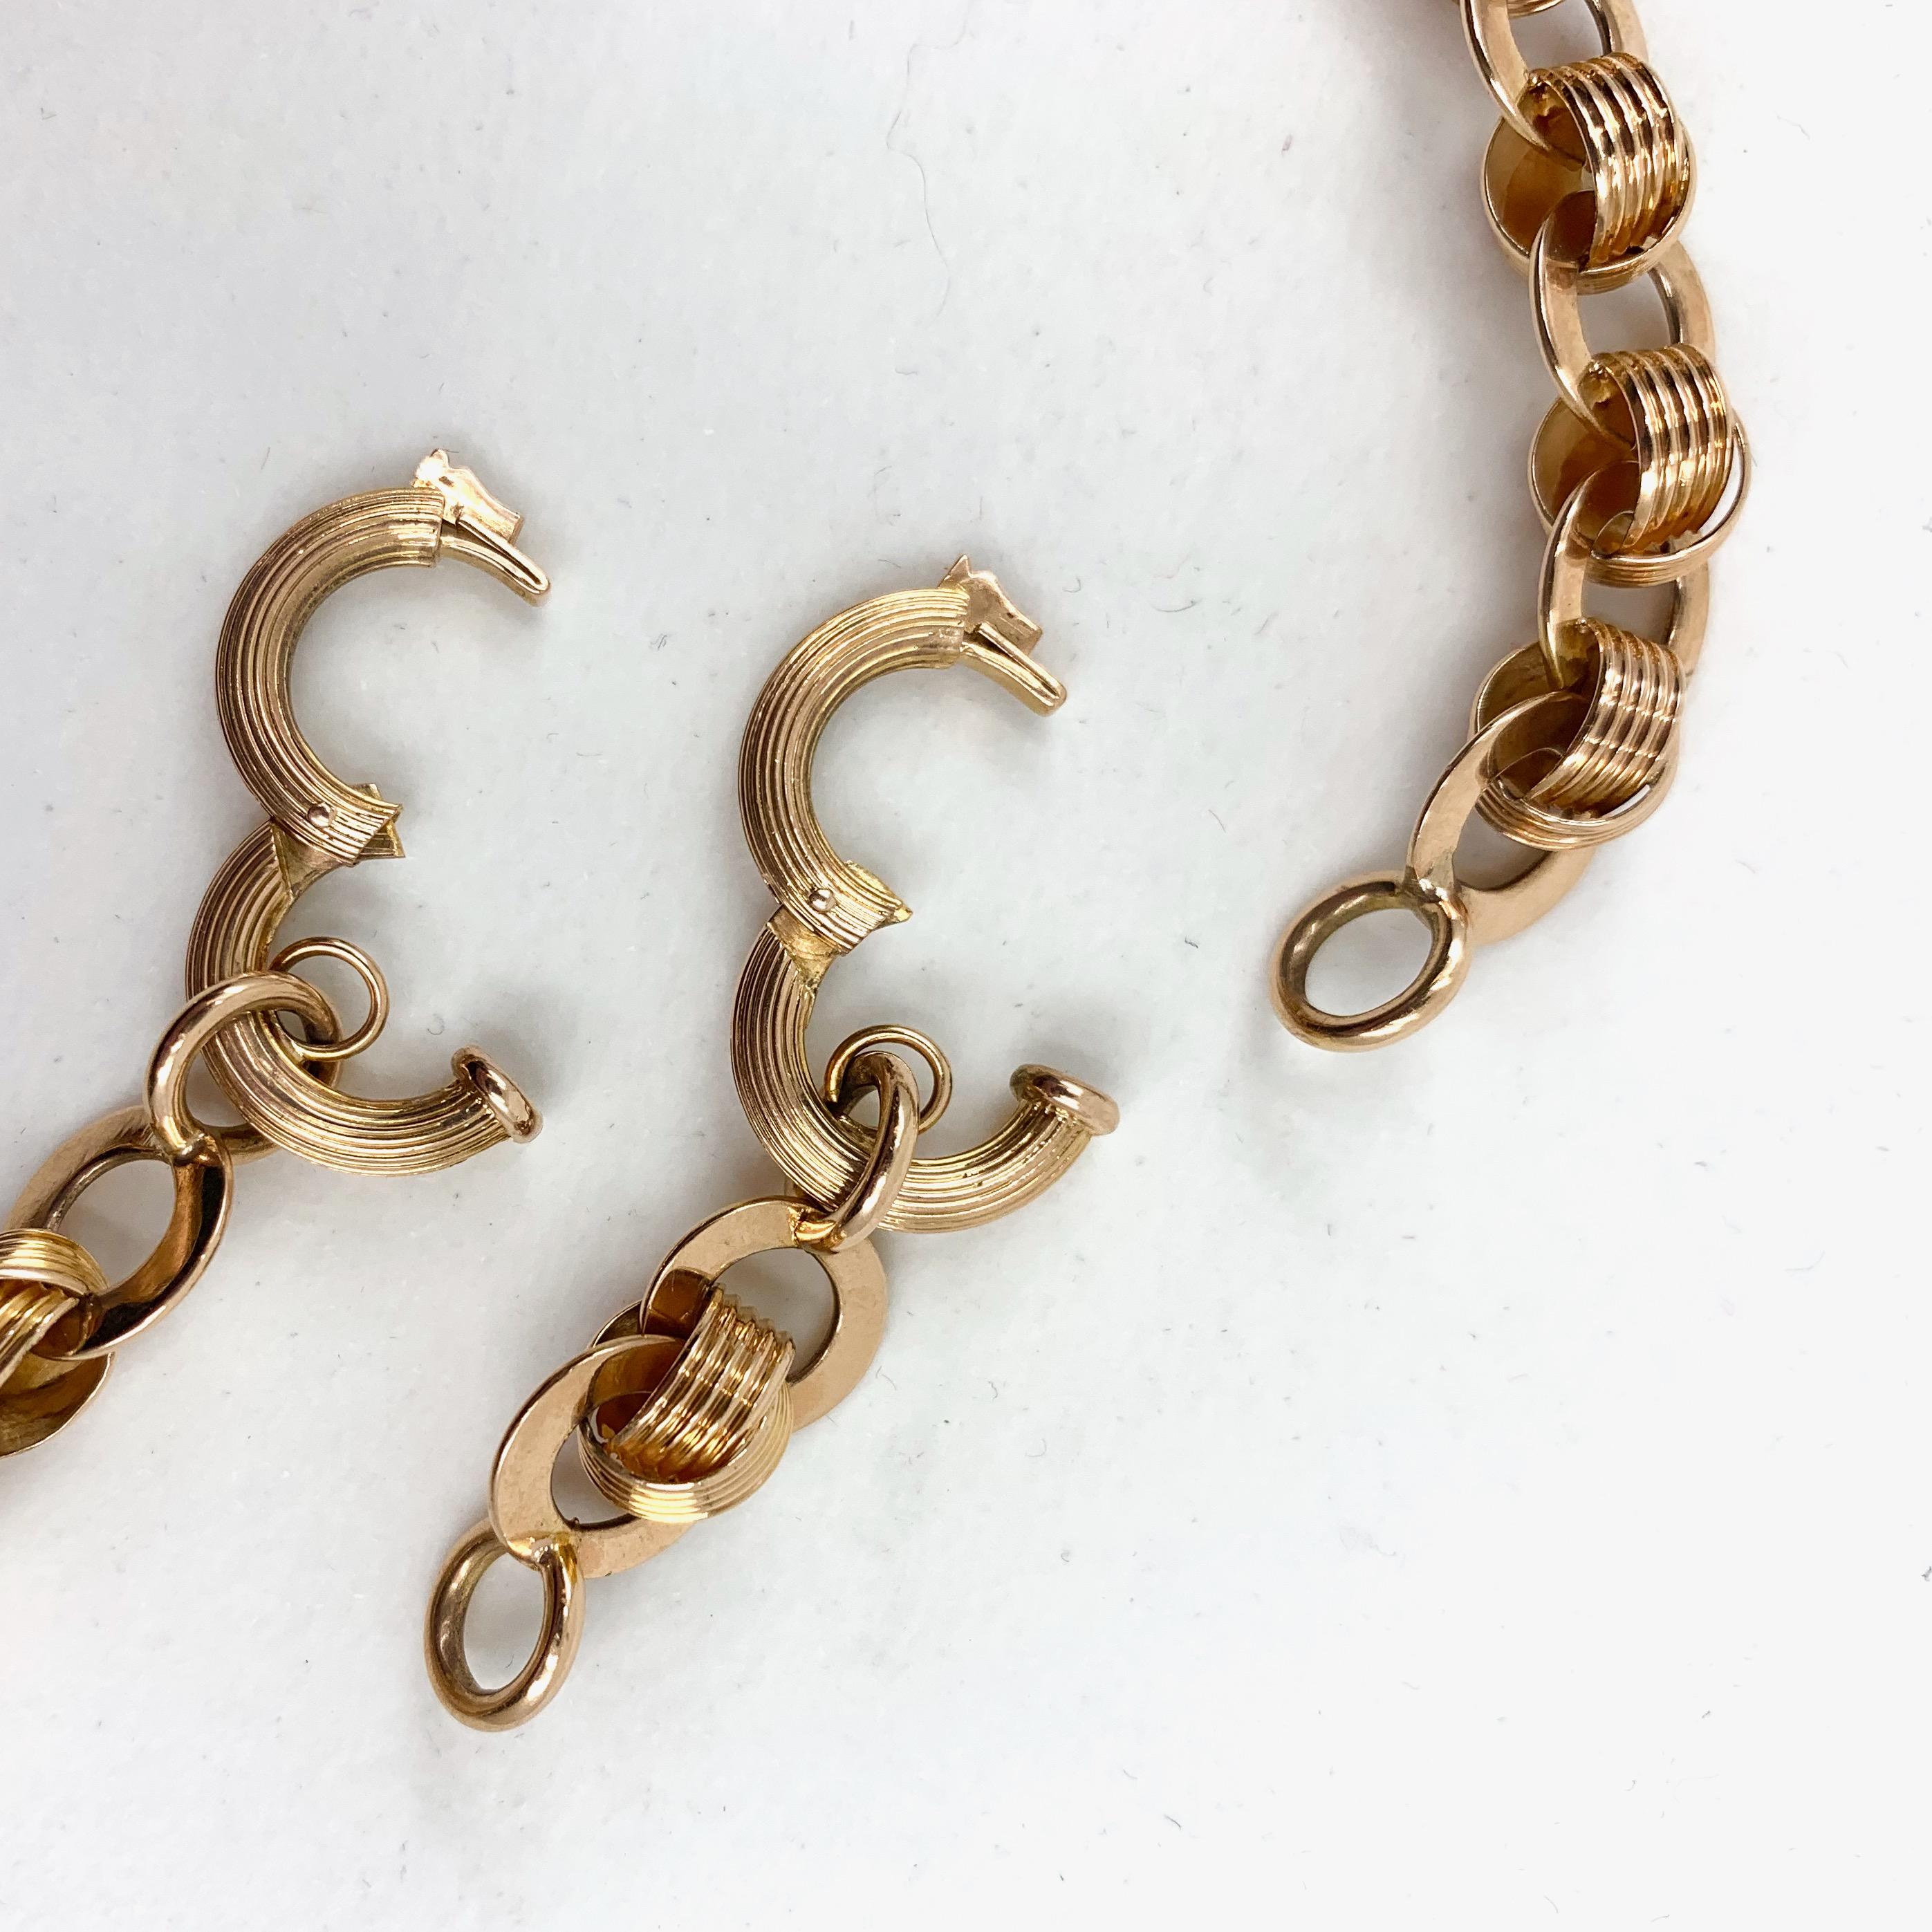 Ring & Connector Chain in 18 Karat Gold with Detachable Extender Fob, circa 1920 2